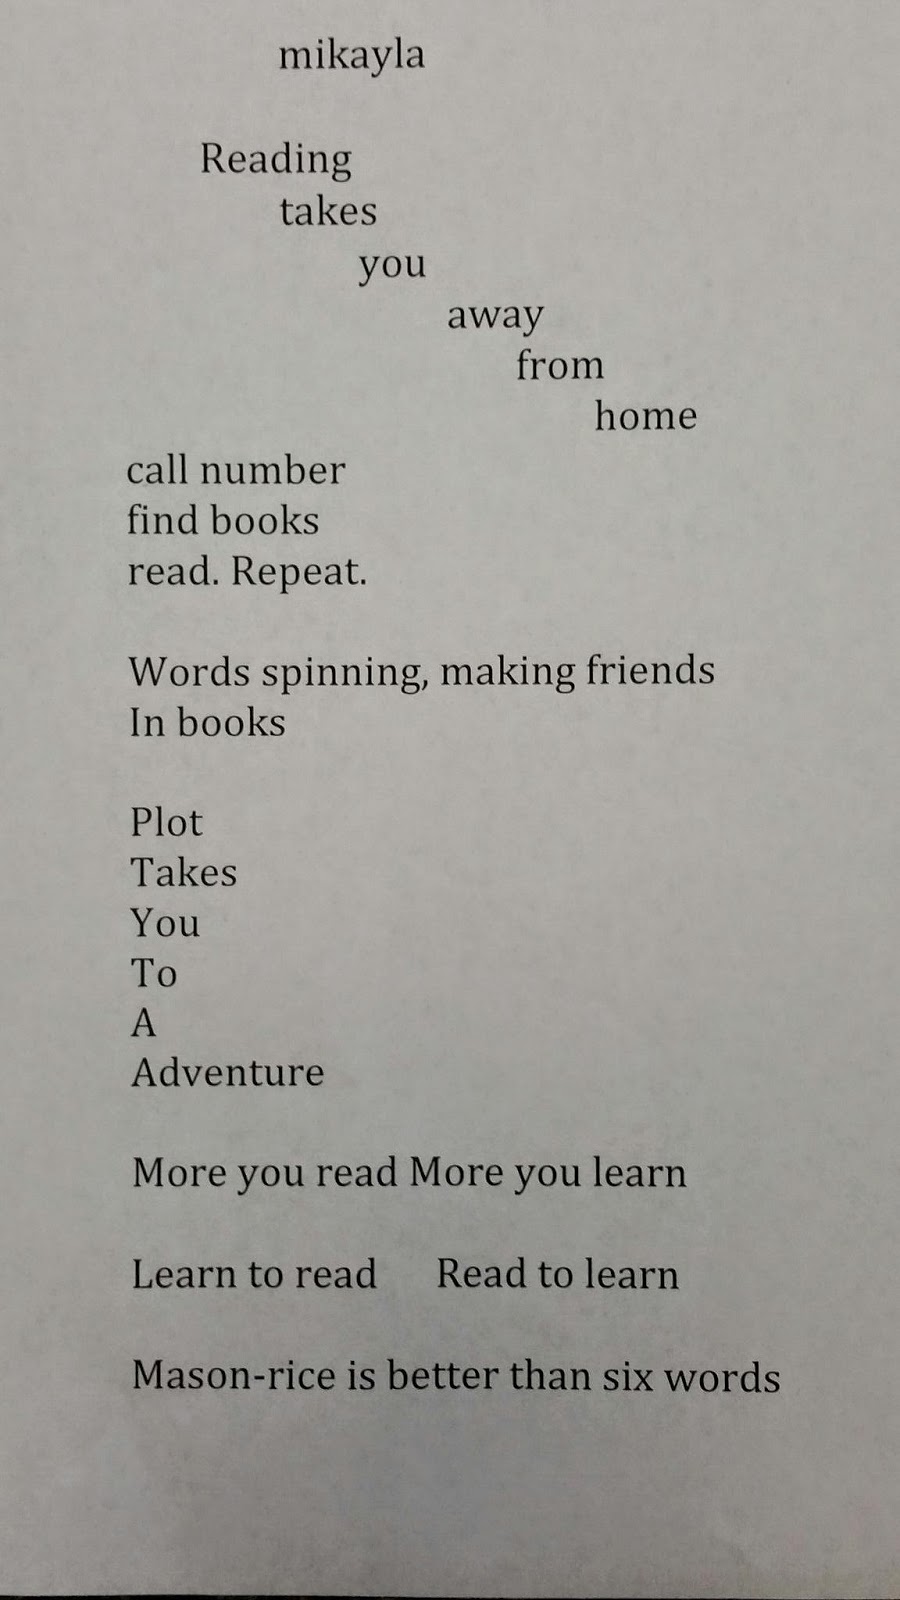 Reederama: Six Word Memoirs created by 5th grade students